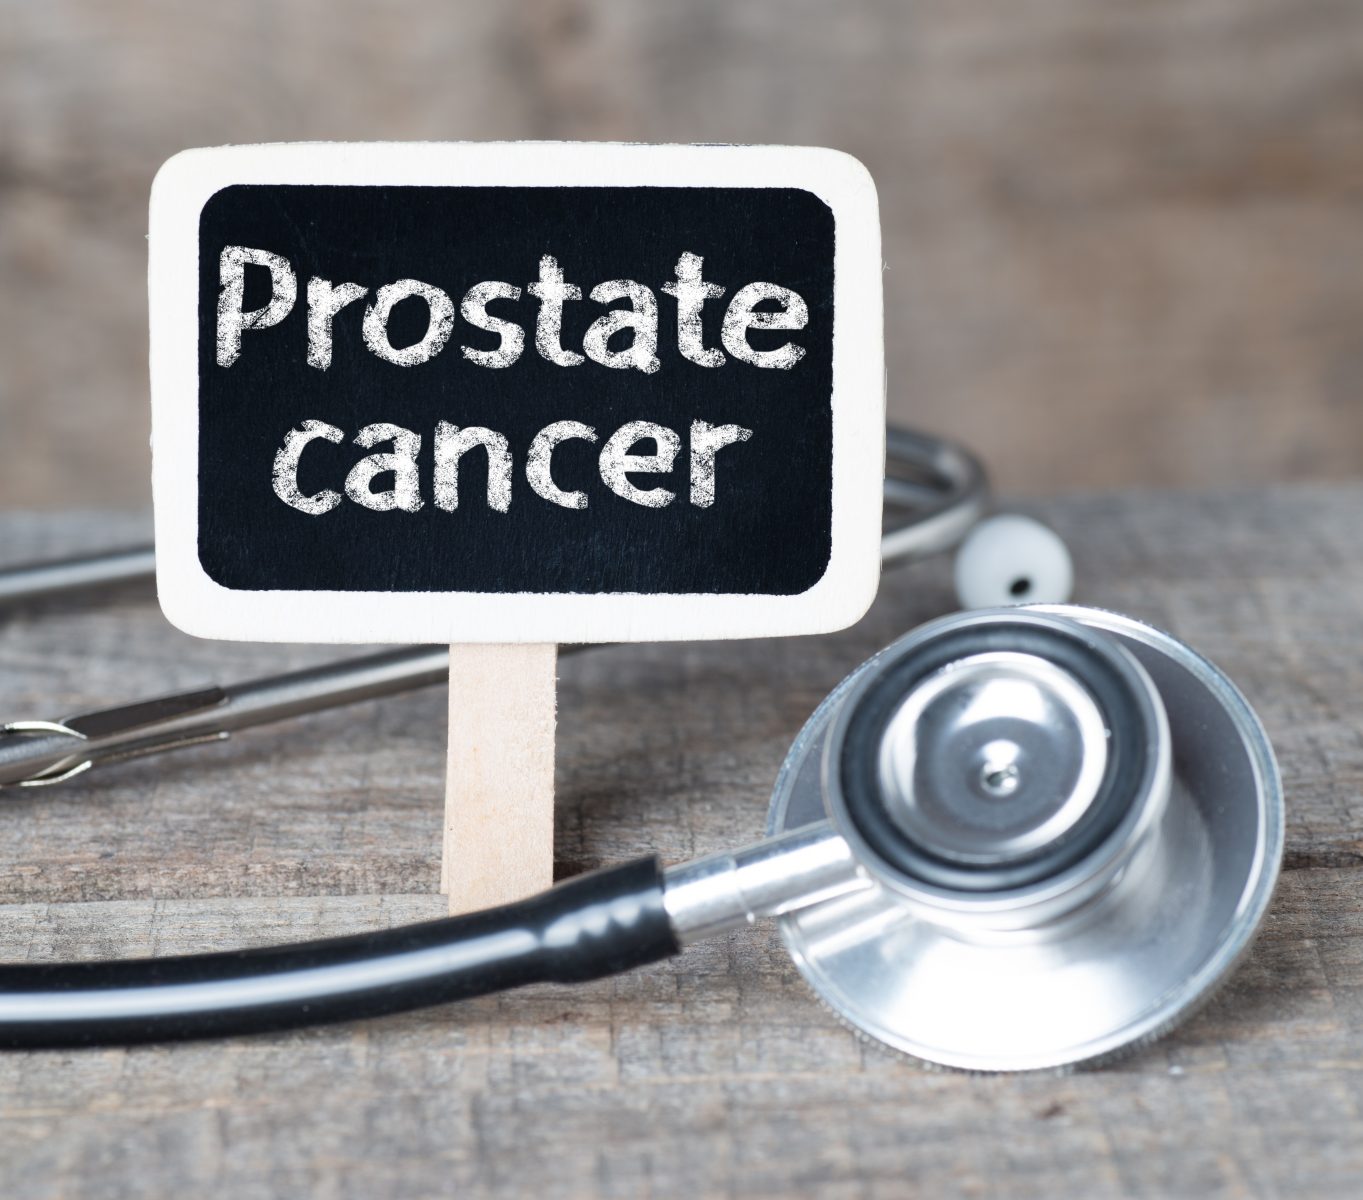 Prostate Cancer Surgery More Effective Than Radiotherapy, Study Finds